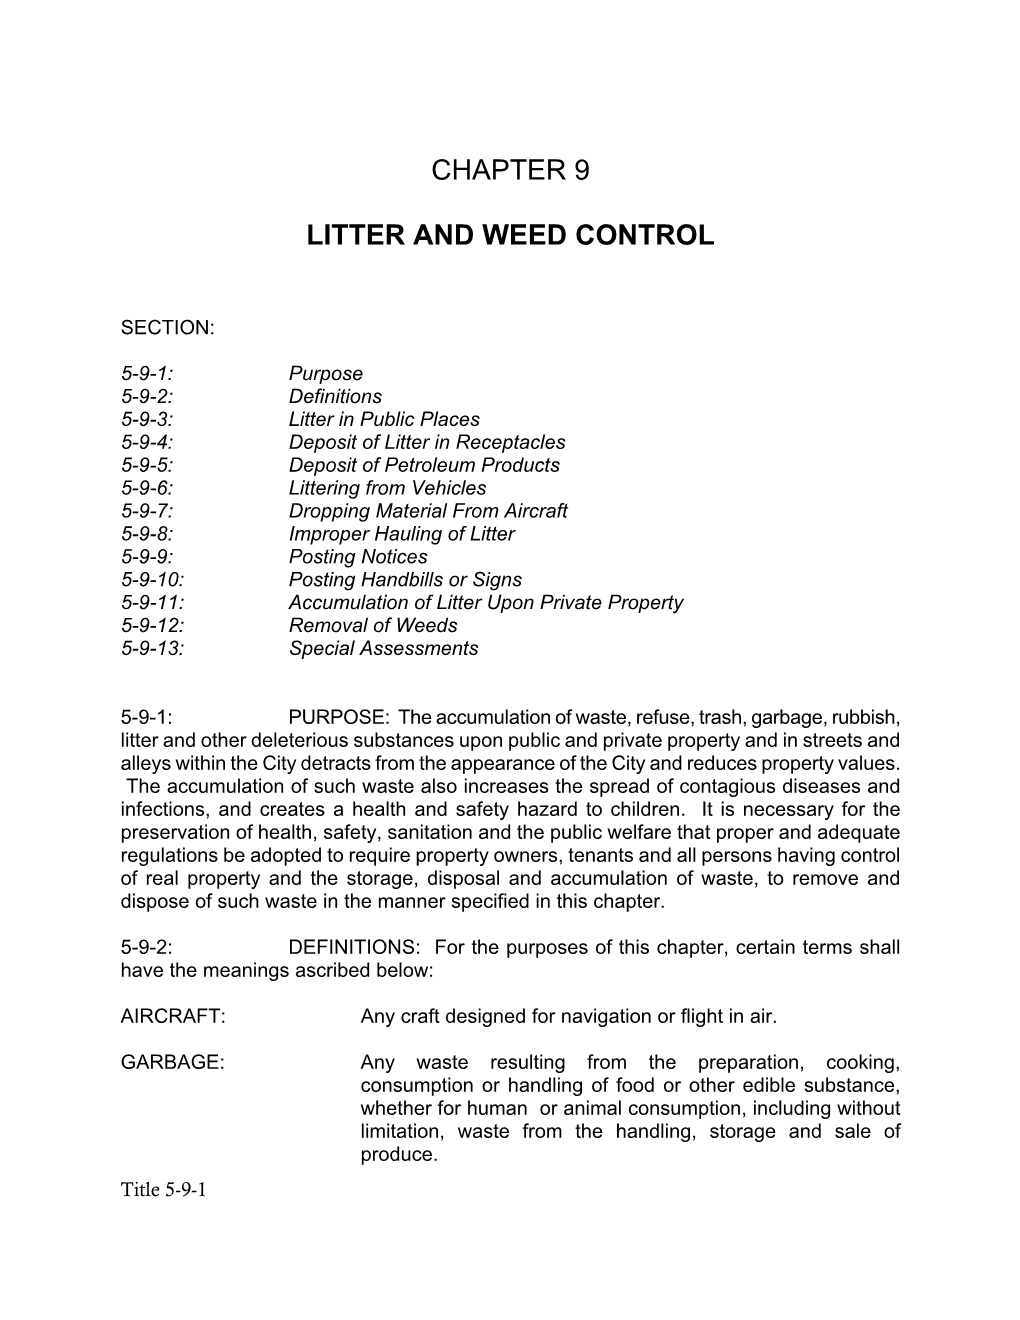 Chapter 9 Litter and Weed Control